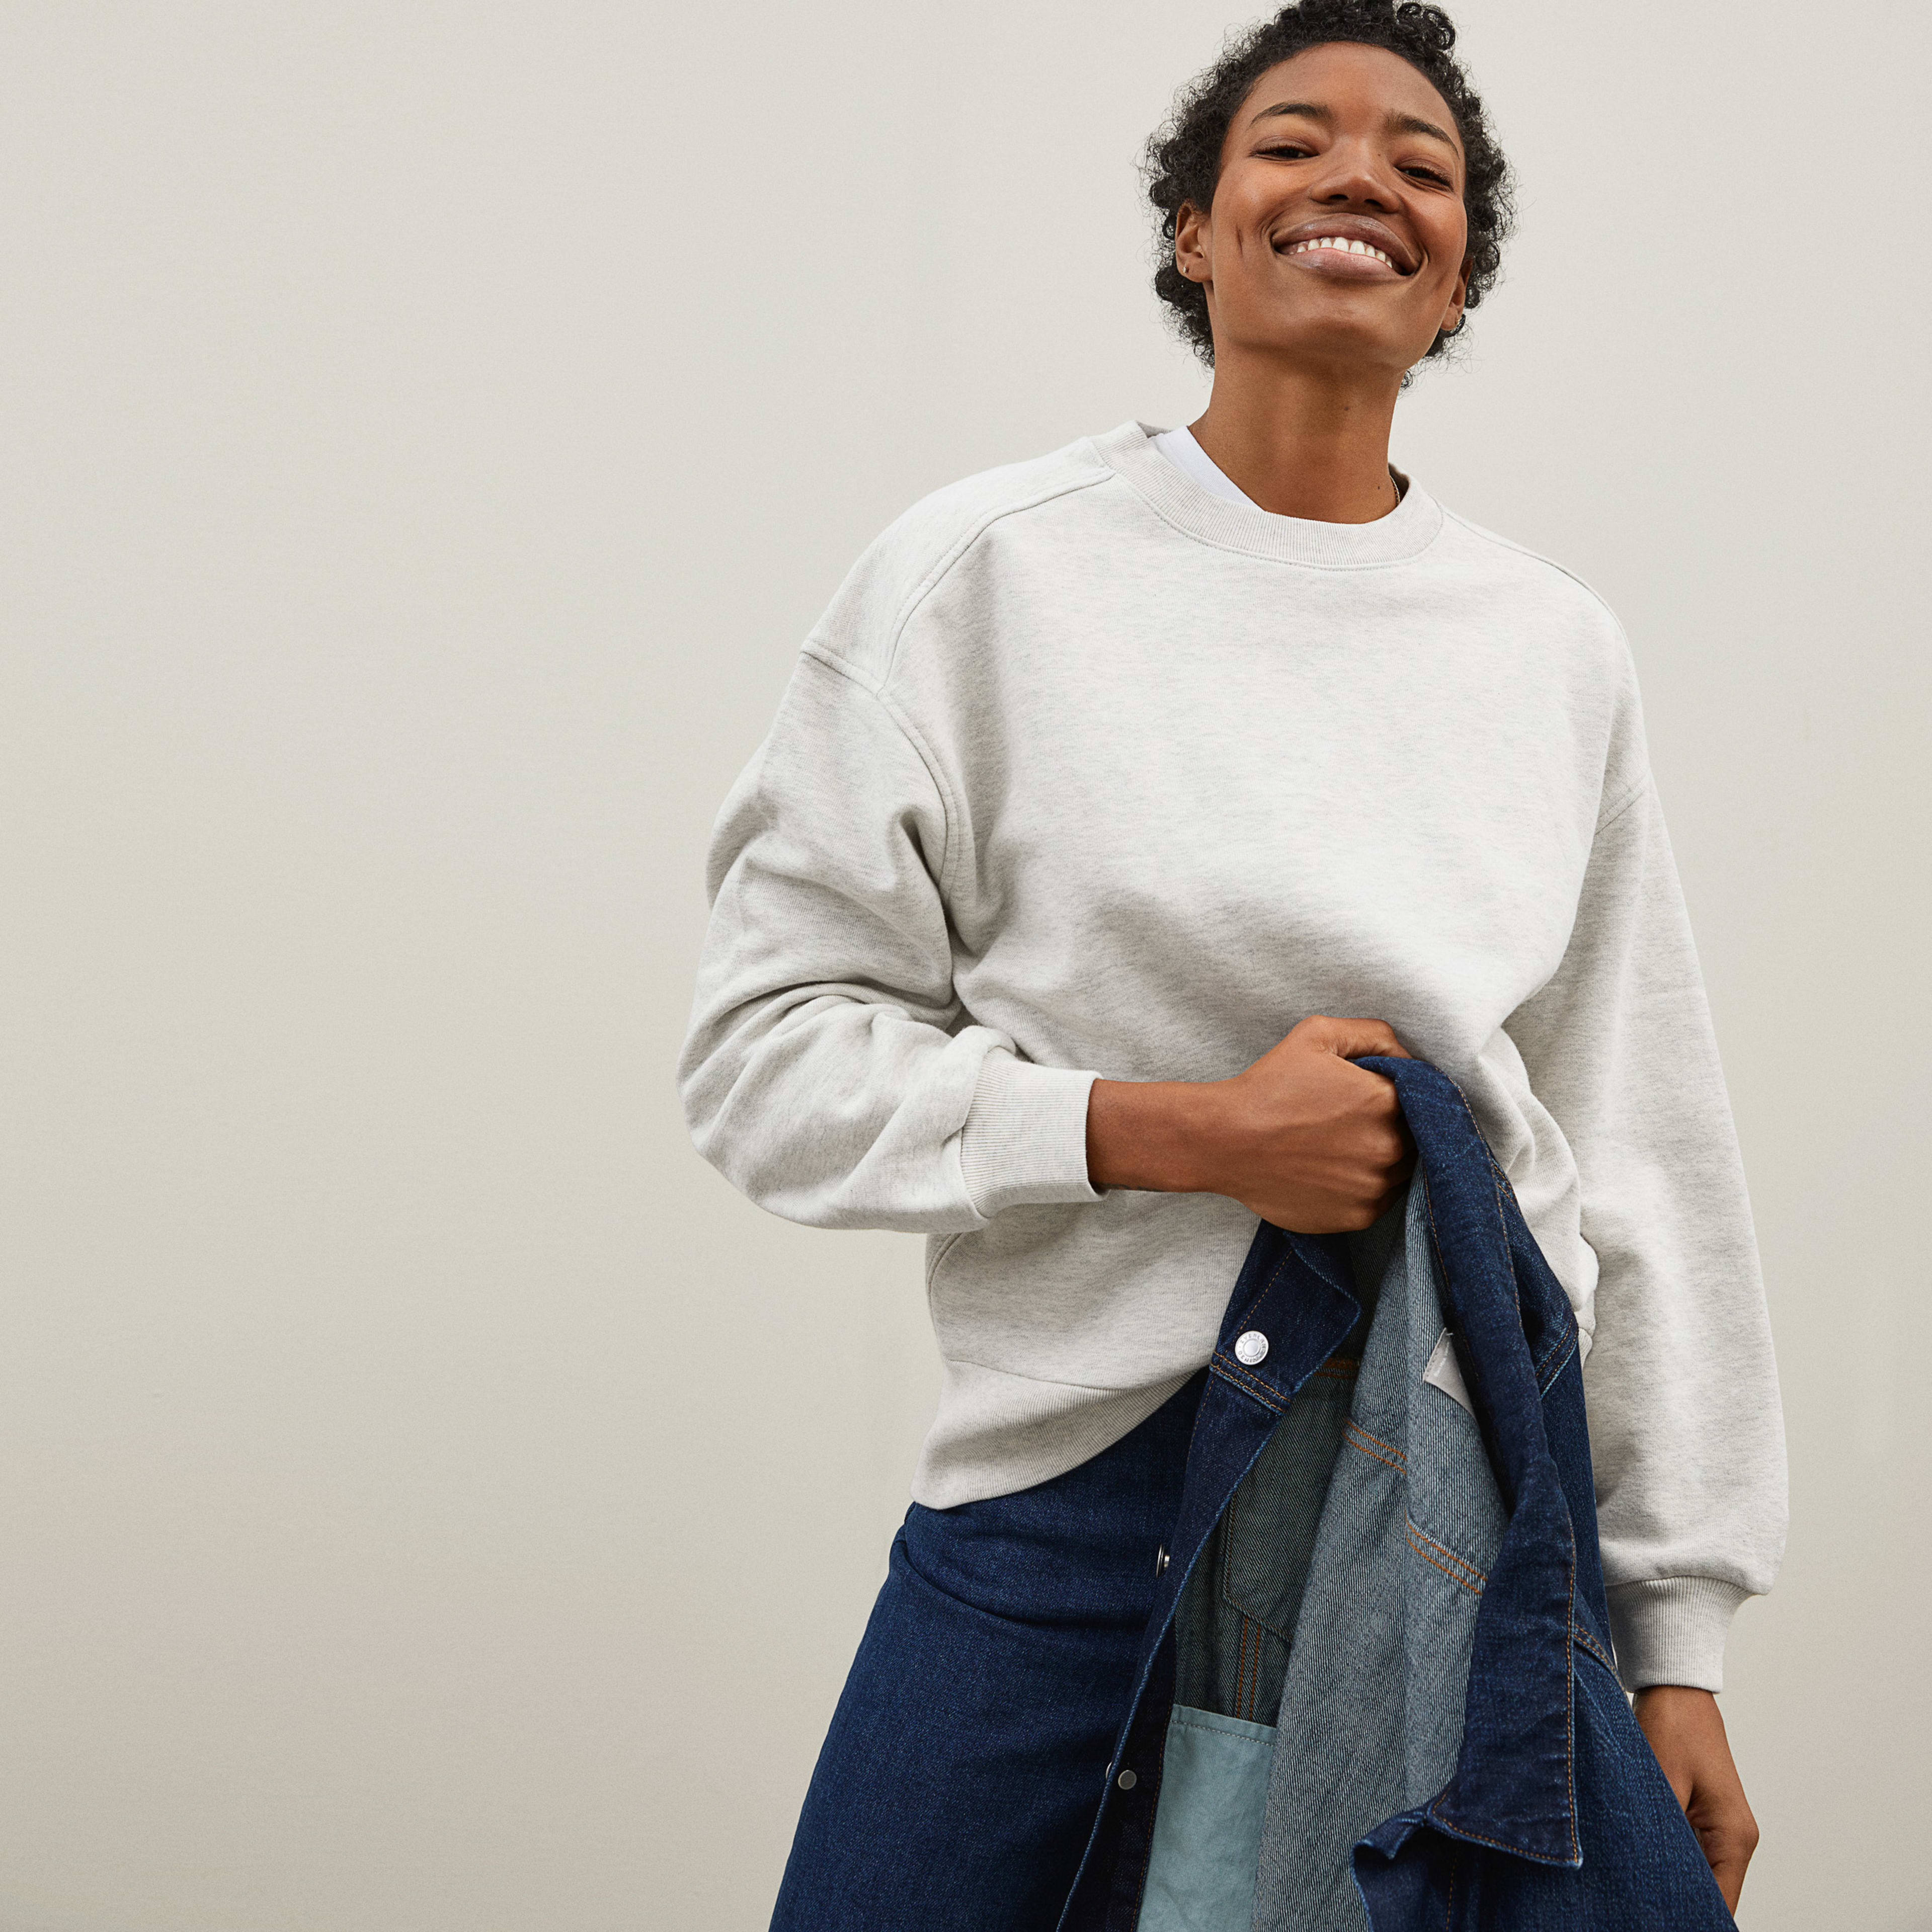 Track Oversized Crew by Everlane in Light Heather Grey, Size XS